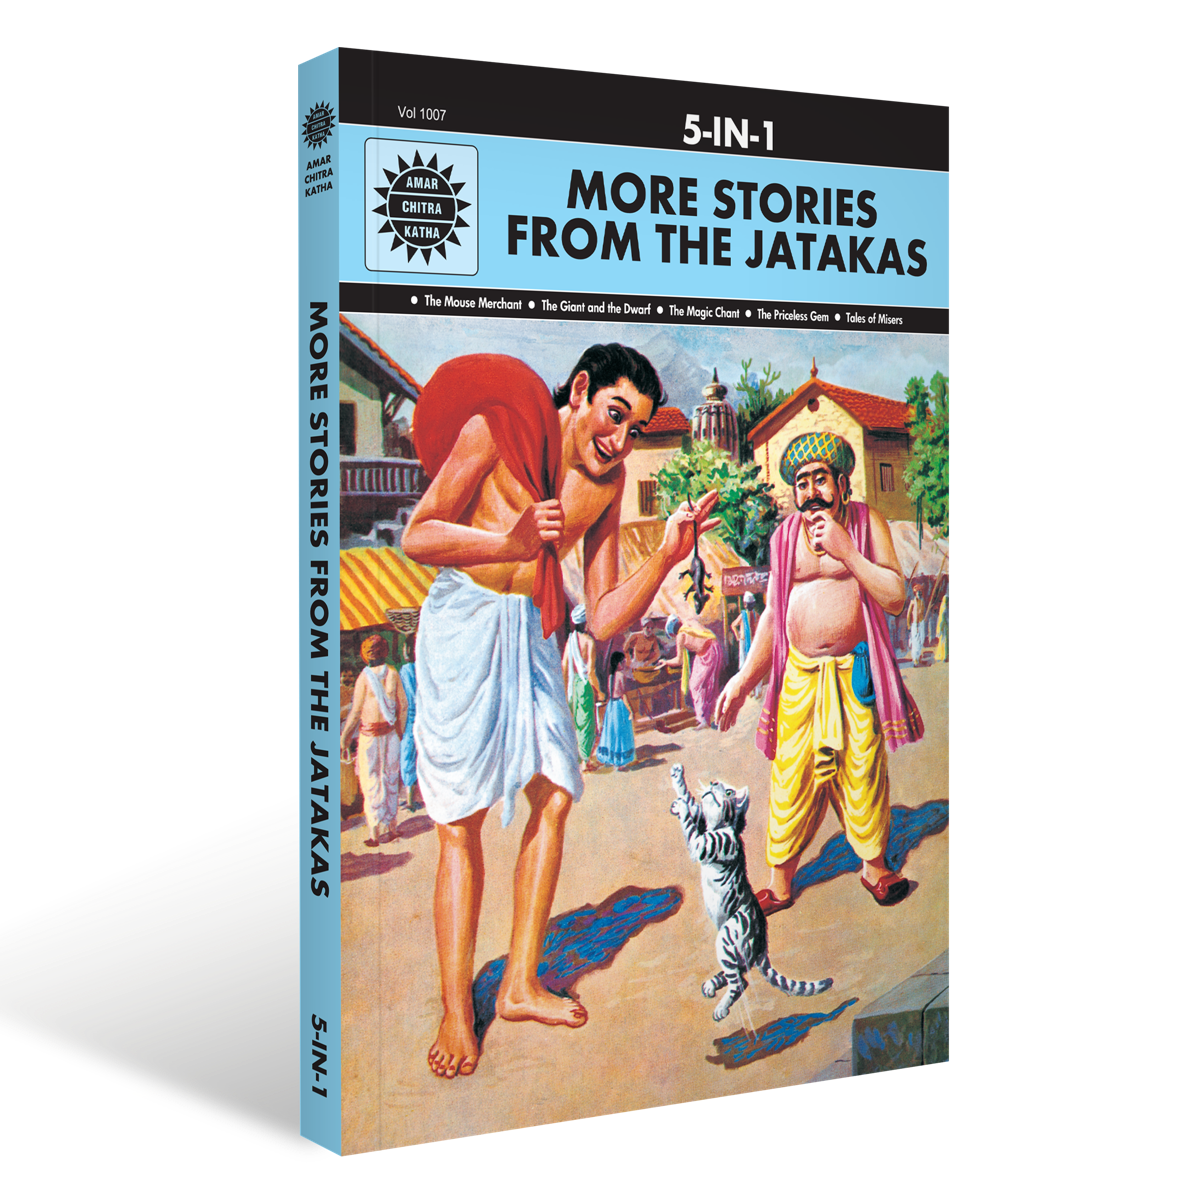 More Stories From The Jatakas: 5-in-1